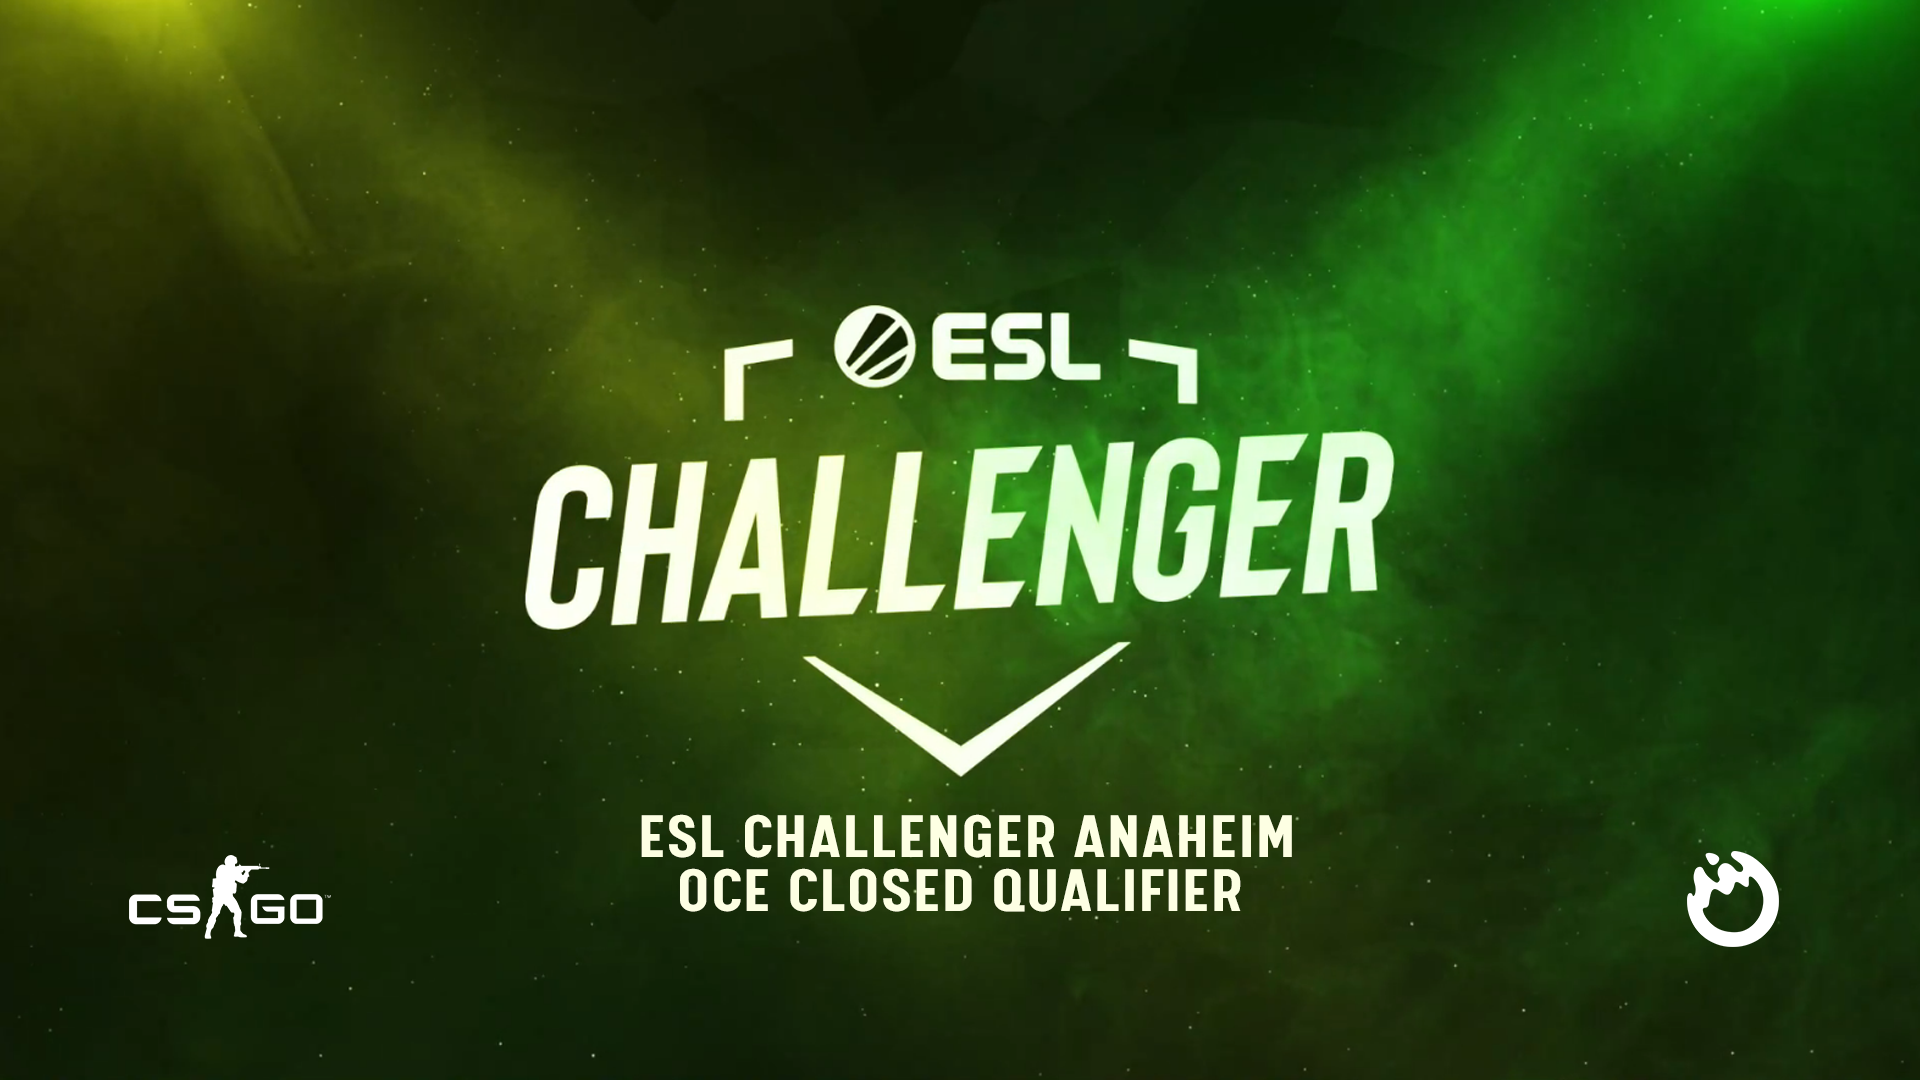 ORDER bounce back to qualify for ESL Challenger Anaheim over LookingForOrg